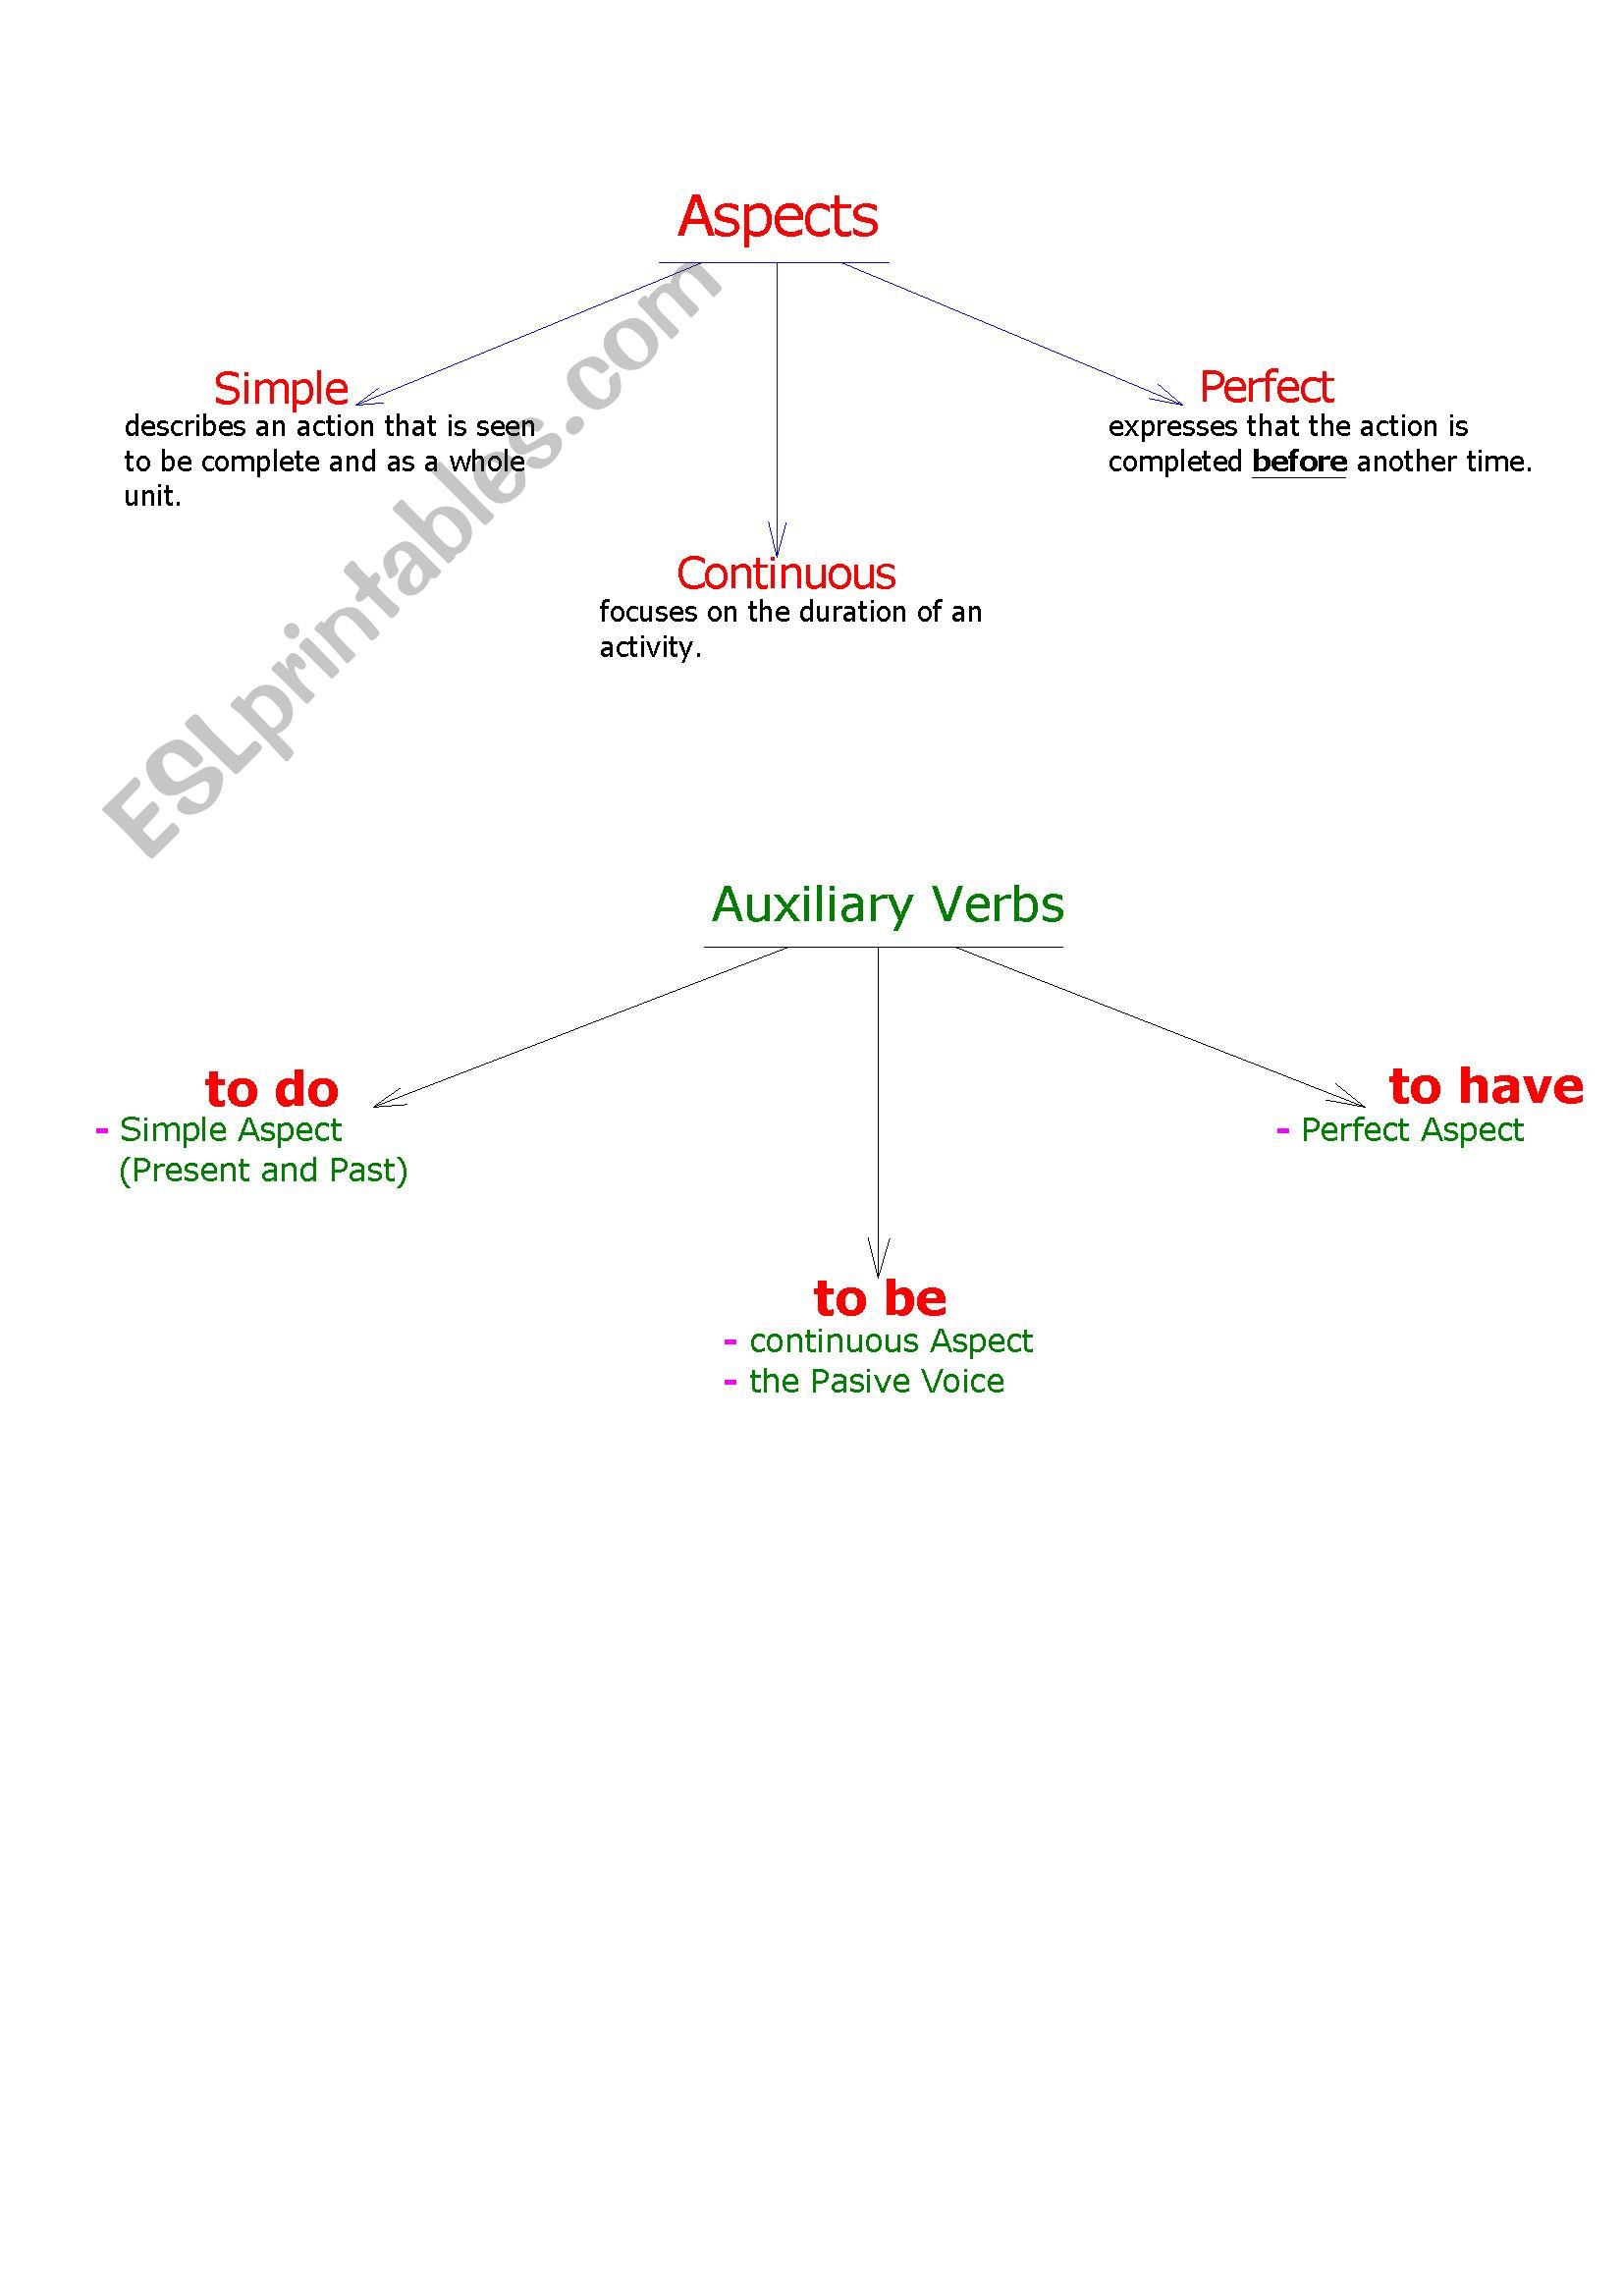 Aspects and Auxiliary Verbs worksheet